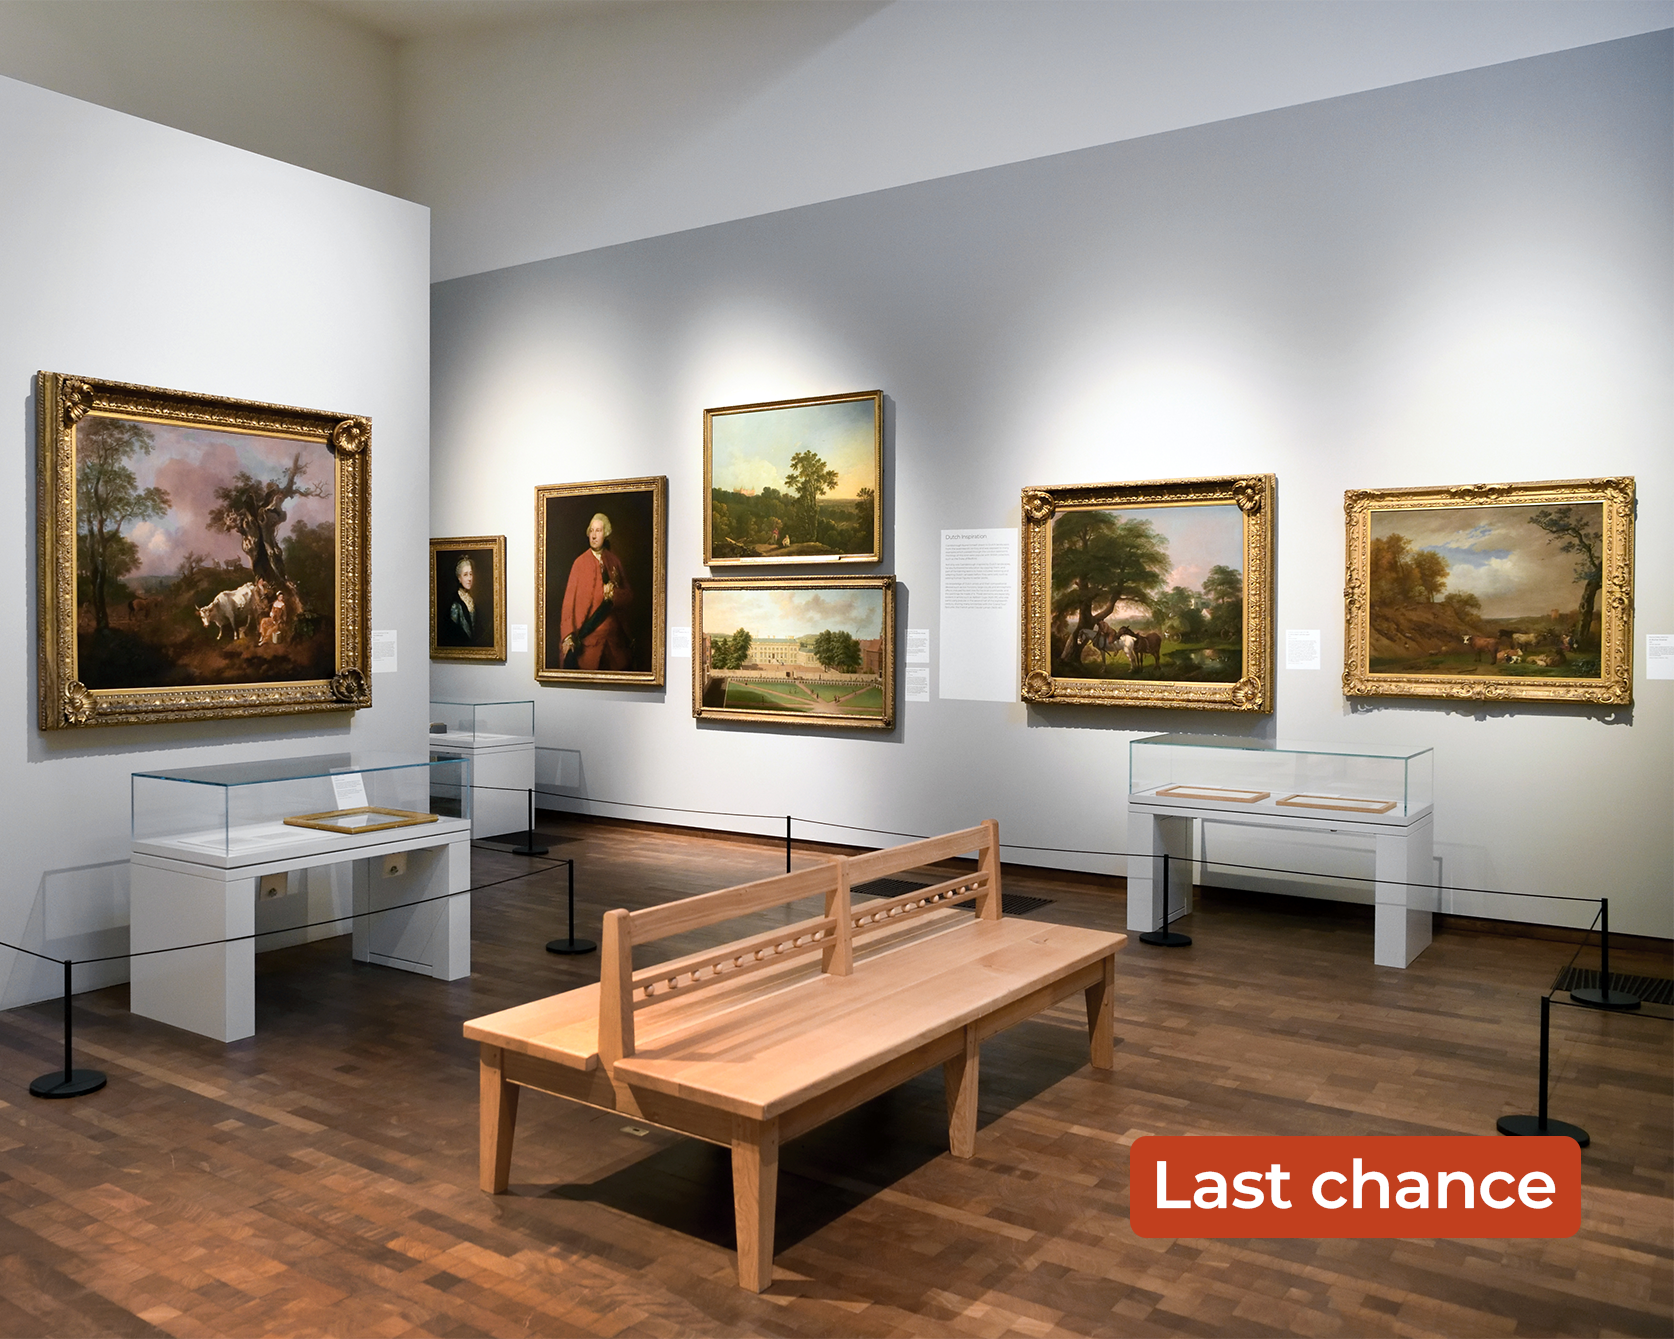 An image taken within the Timothy & Mary Clode Gallery of the Woburn exhibition.It shows a series of masterpieces on the wall and artefact cabinets, as well as a Suffolk style bench in the centre. The words 'Last chance' are overlayed in the bottom right corner.